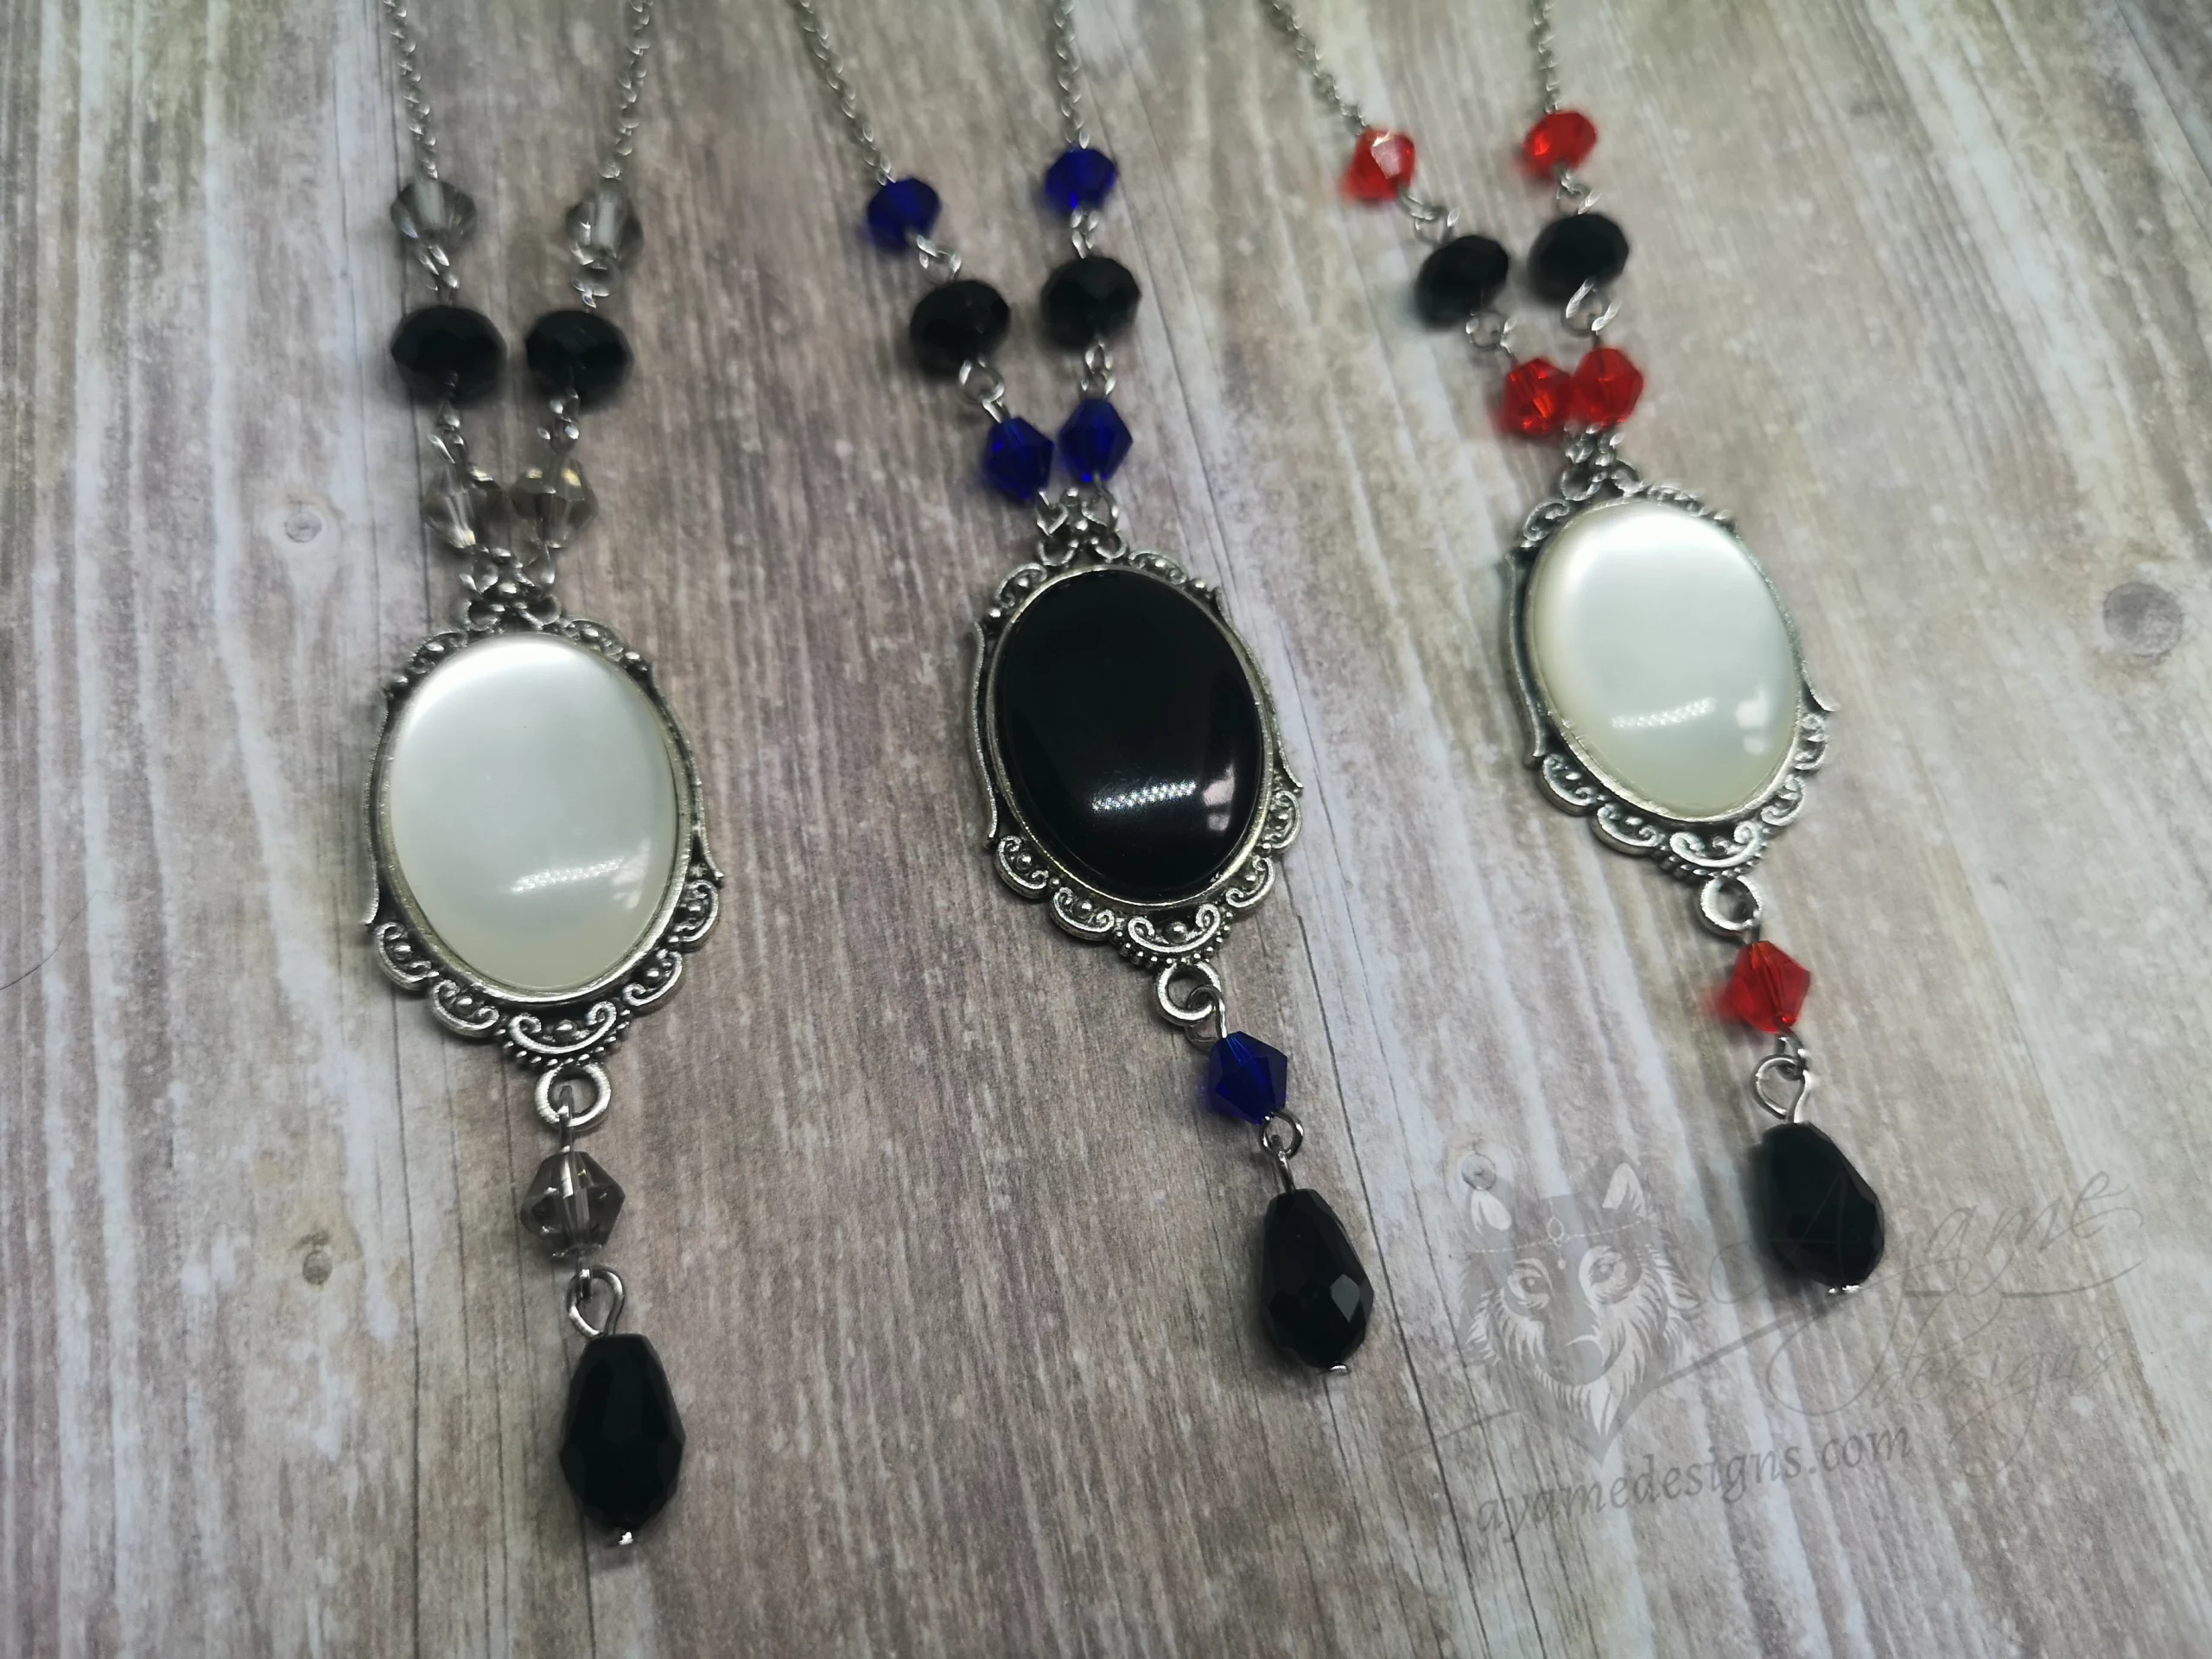 Handmade adjustable gothic necklace with a resin cabochon in a filigree frame, Austrian crystal beads and stainless steel chain